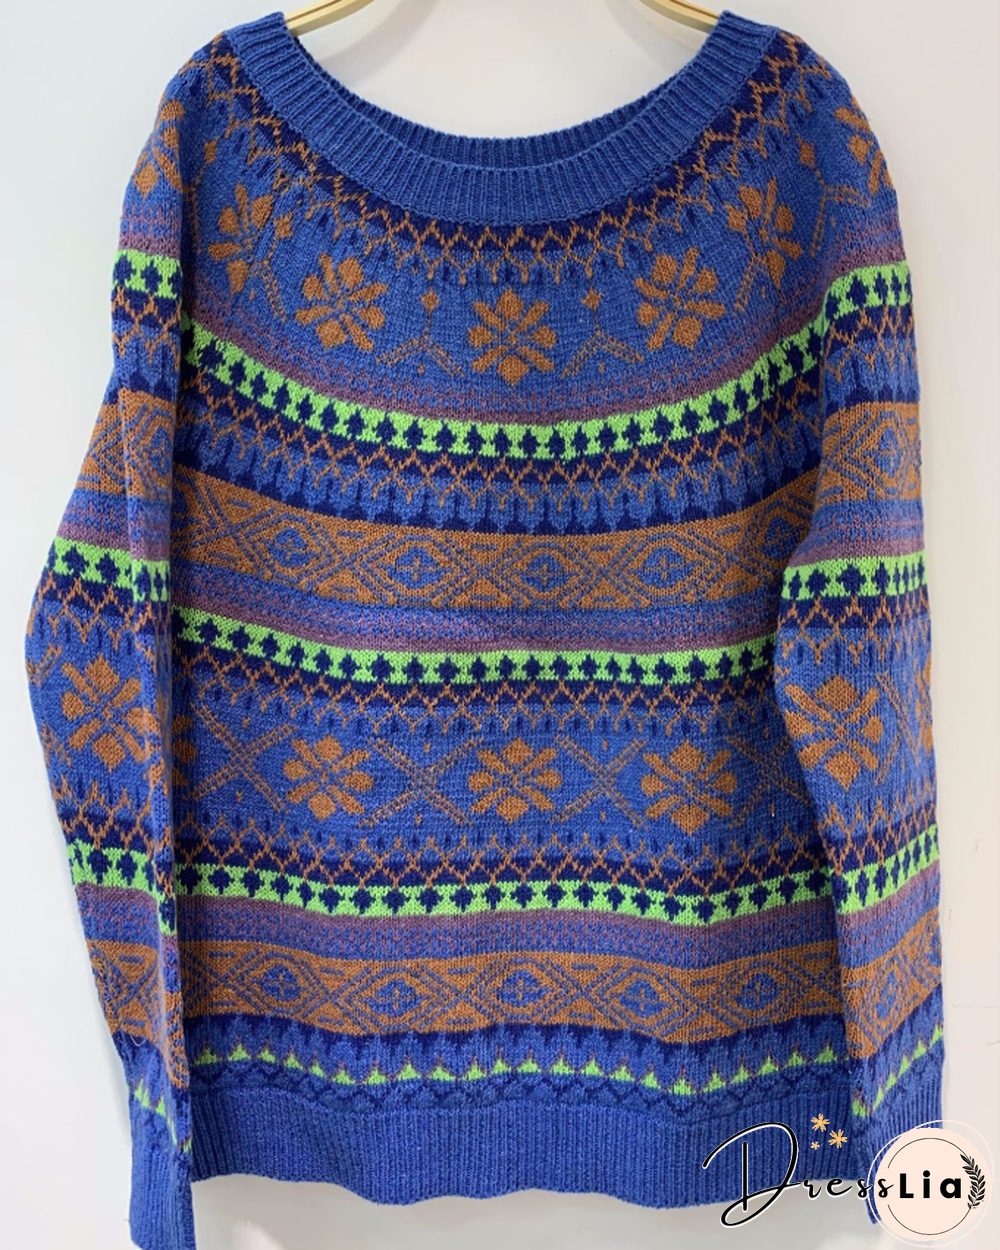 New Loose Vintage Jacquard Ethnic Style Pullover Sweater